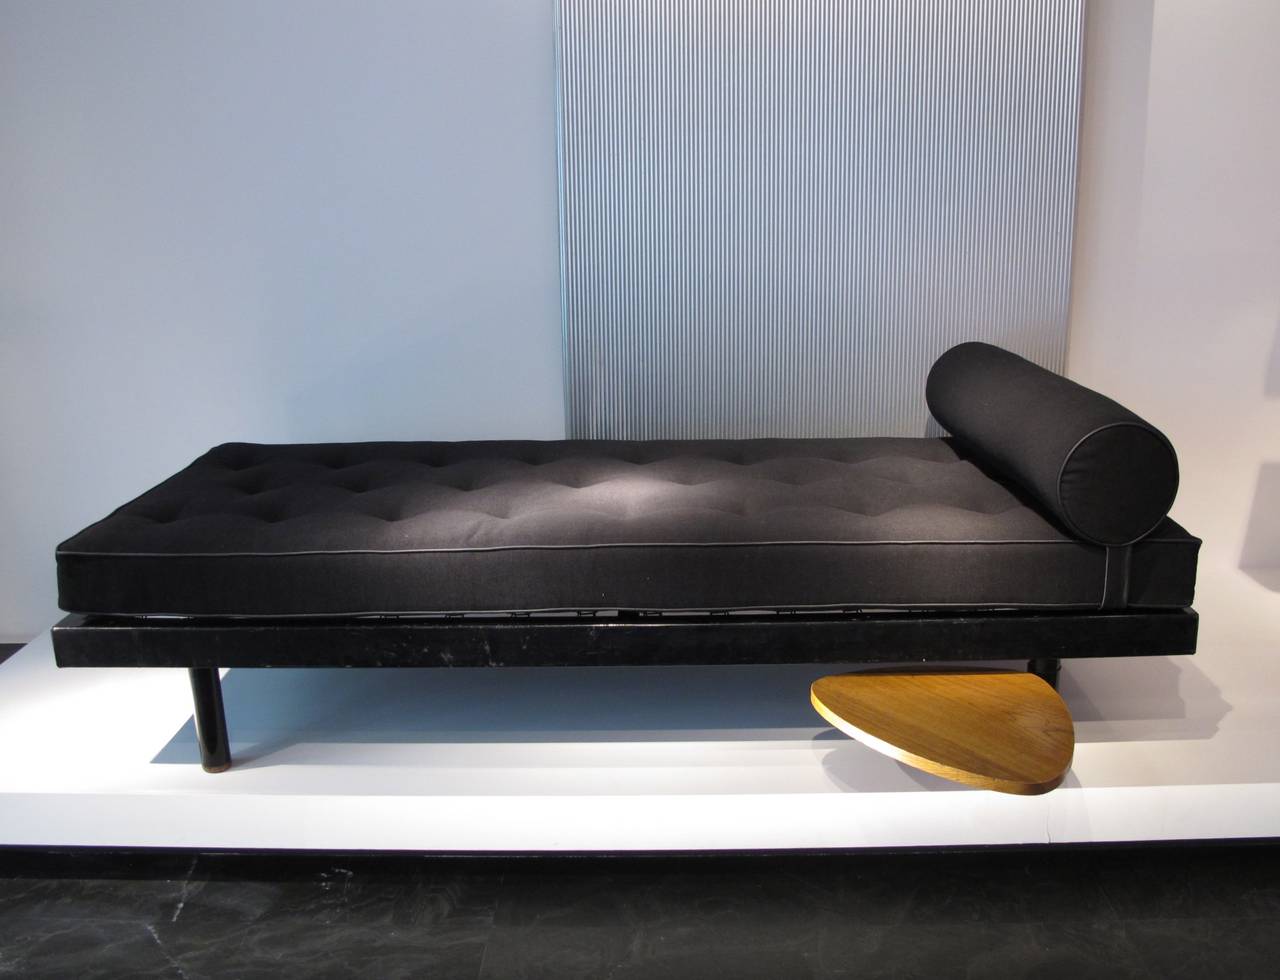 Jean Prouvé (1901-1984).

S.C.A.L. daybed,
circa 1954.

Black lacquered metal frame with wooden swiveling pad, fabric.

In : Renée Diamant, Lits isolés ou jumelés, dans L’Architecture d’Aujourd’hui, sept-oct 1954, p. 36.